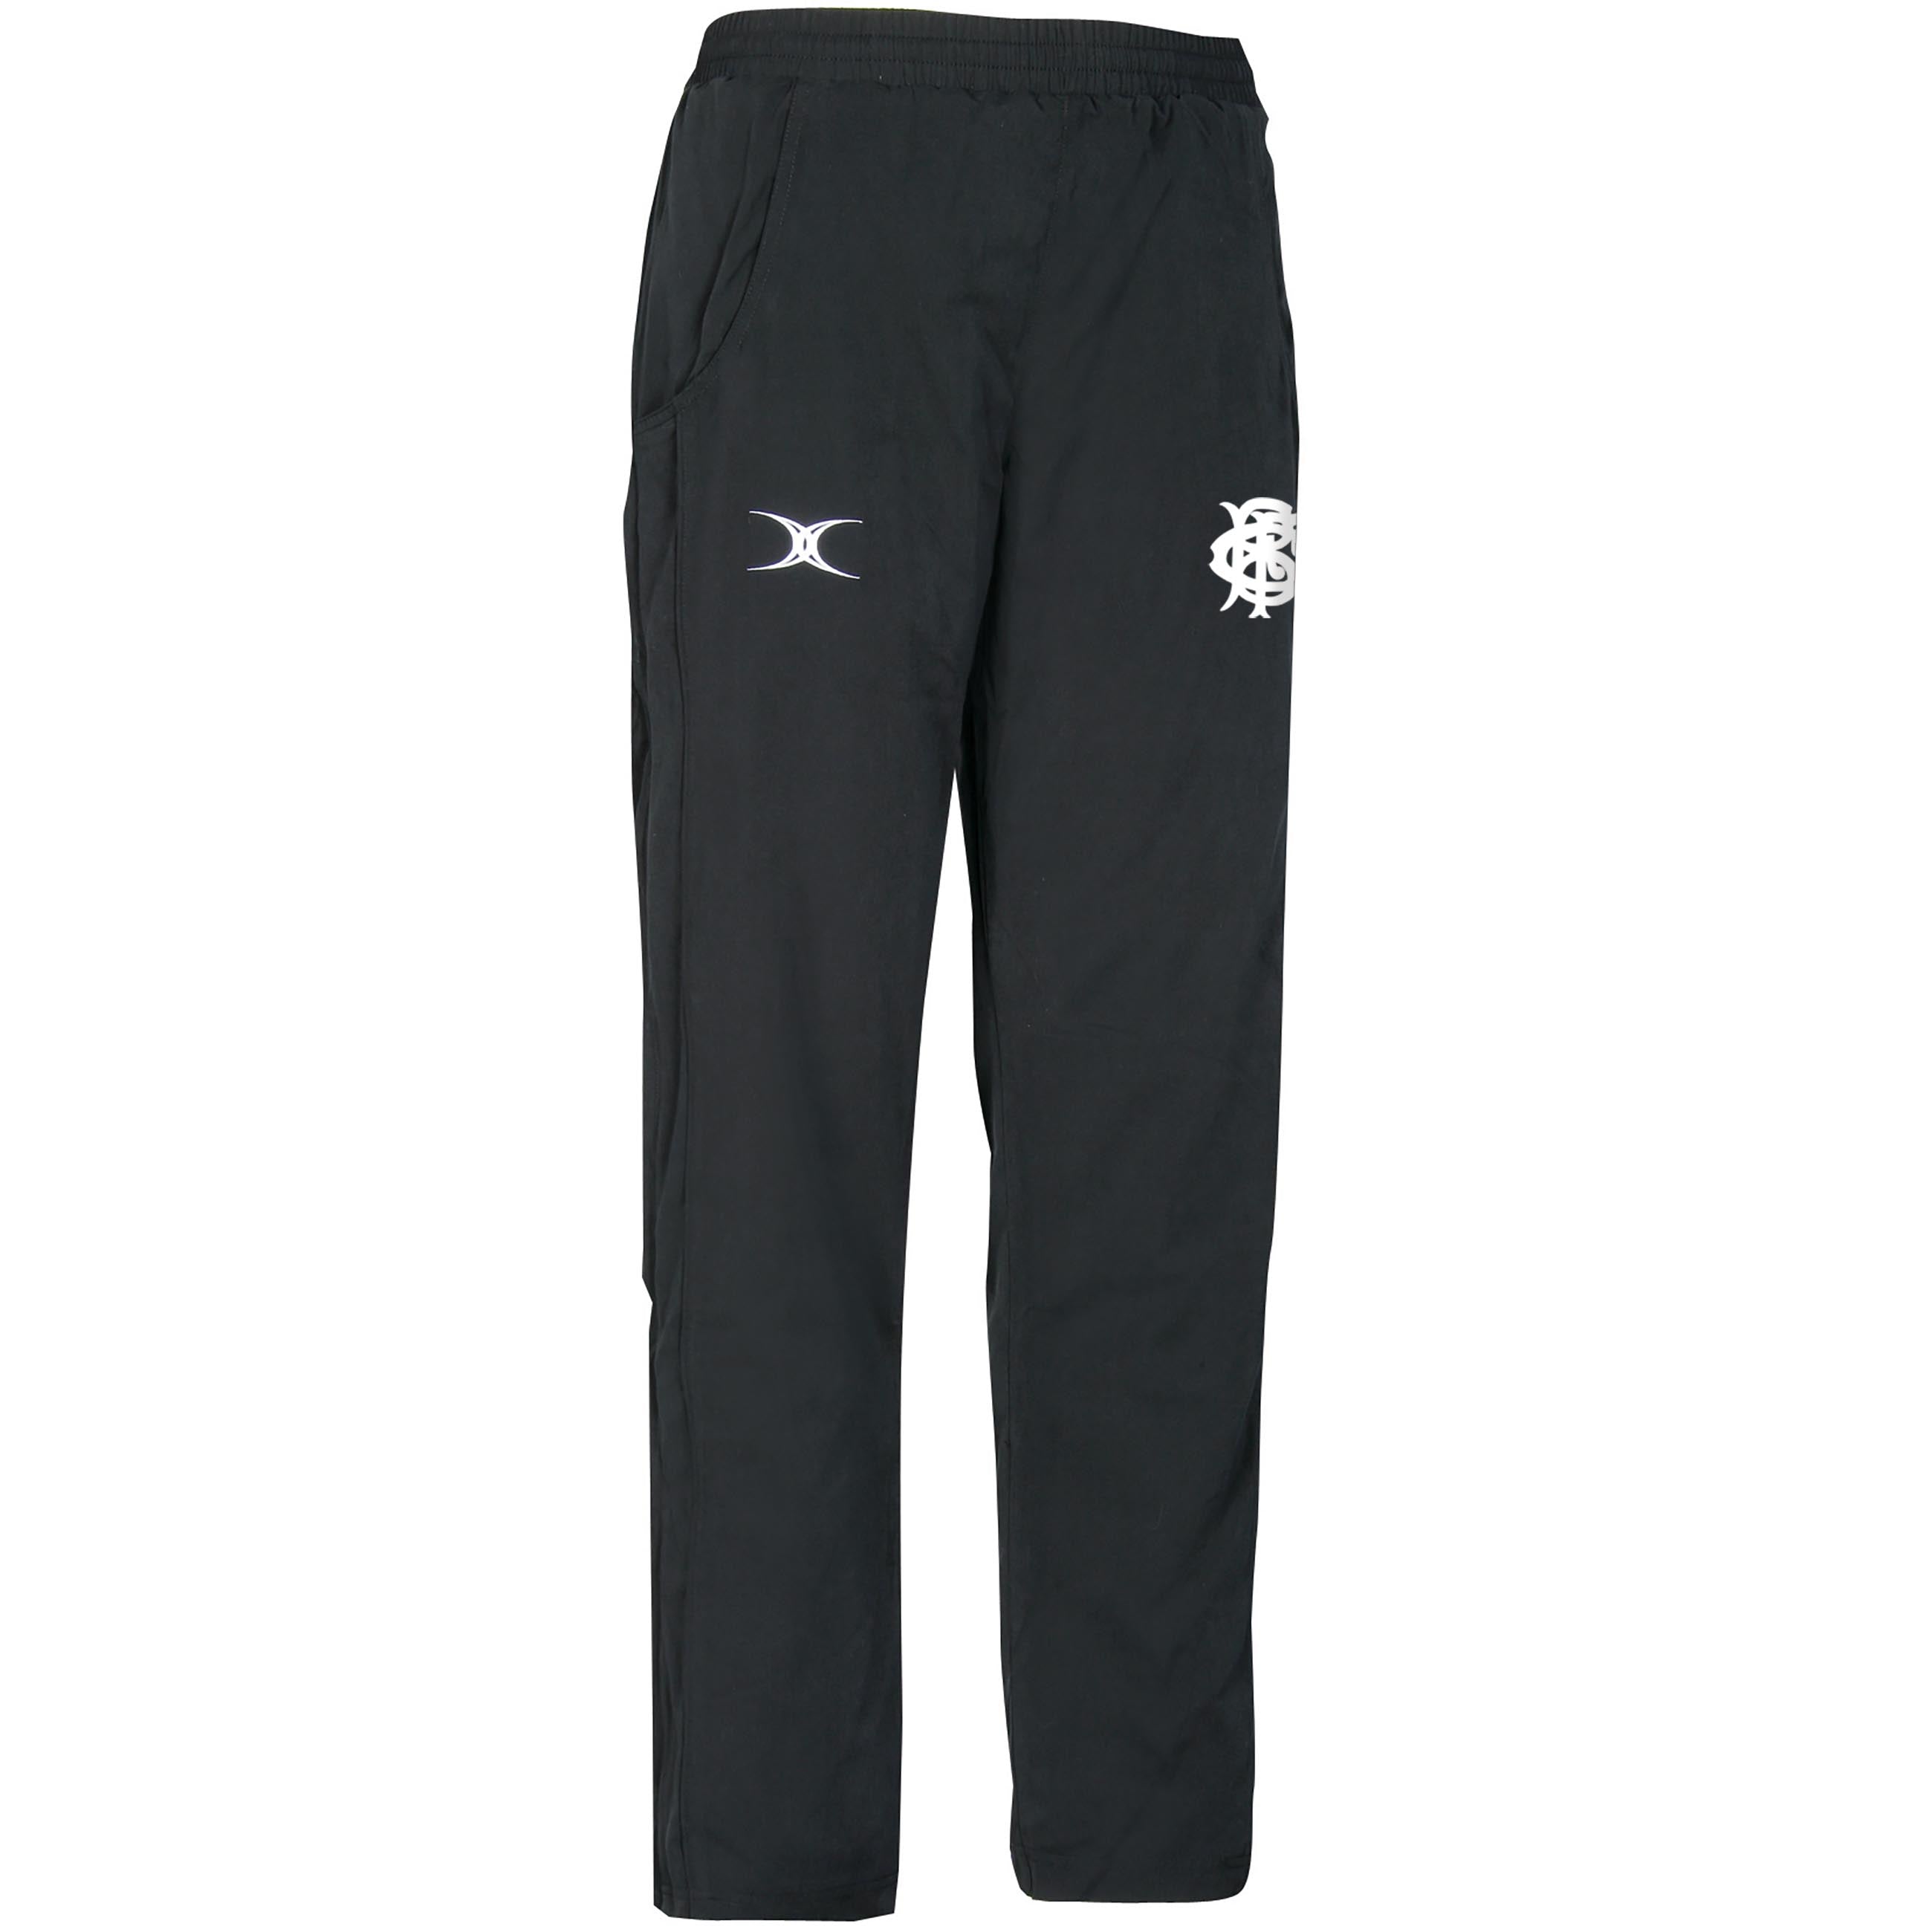 Barbarian FC Adult's Leisure Trouser - Black